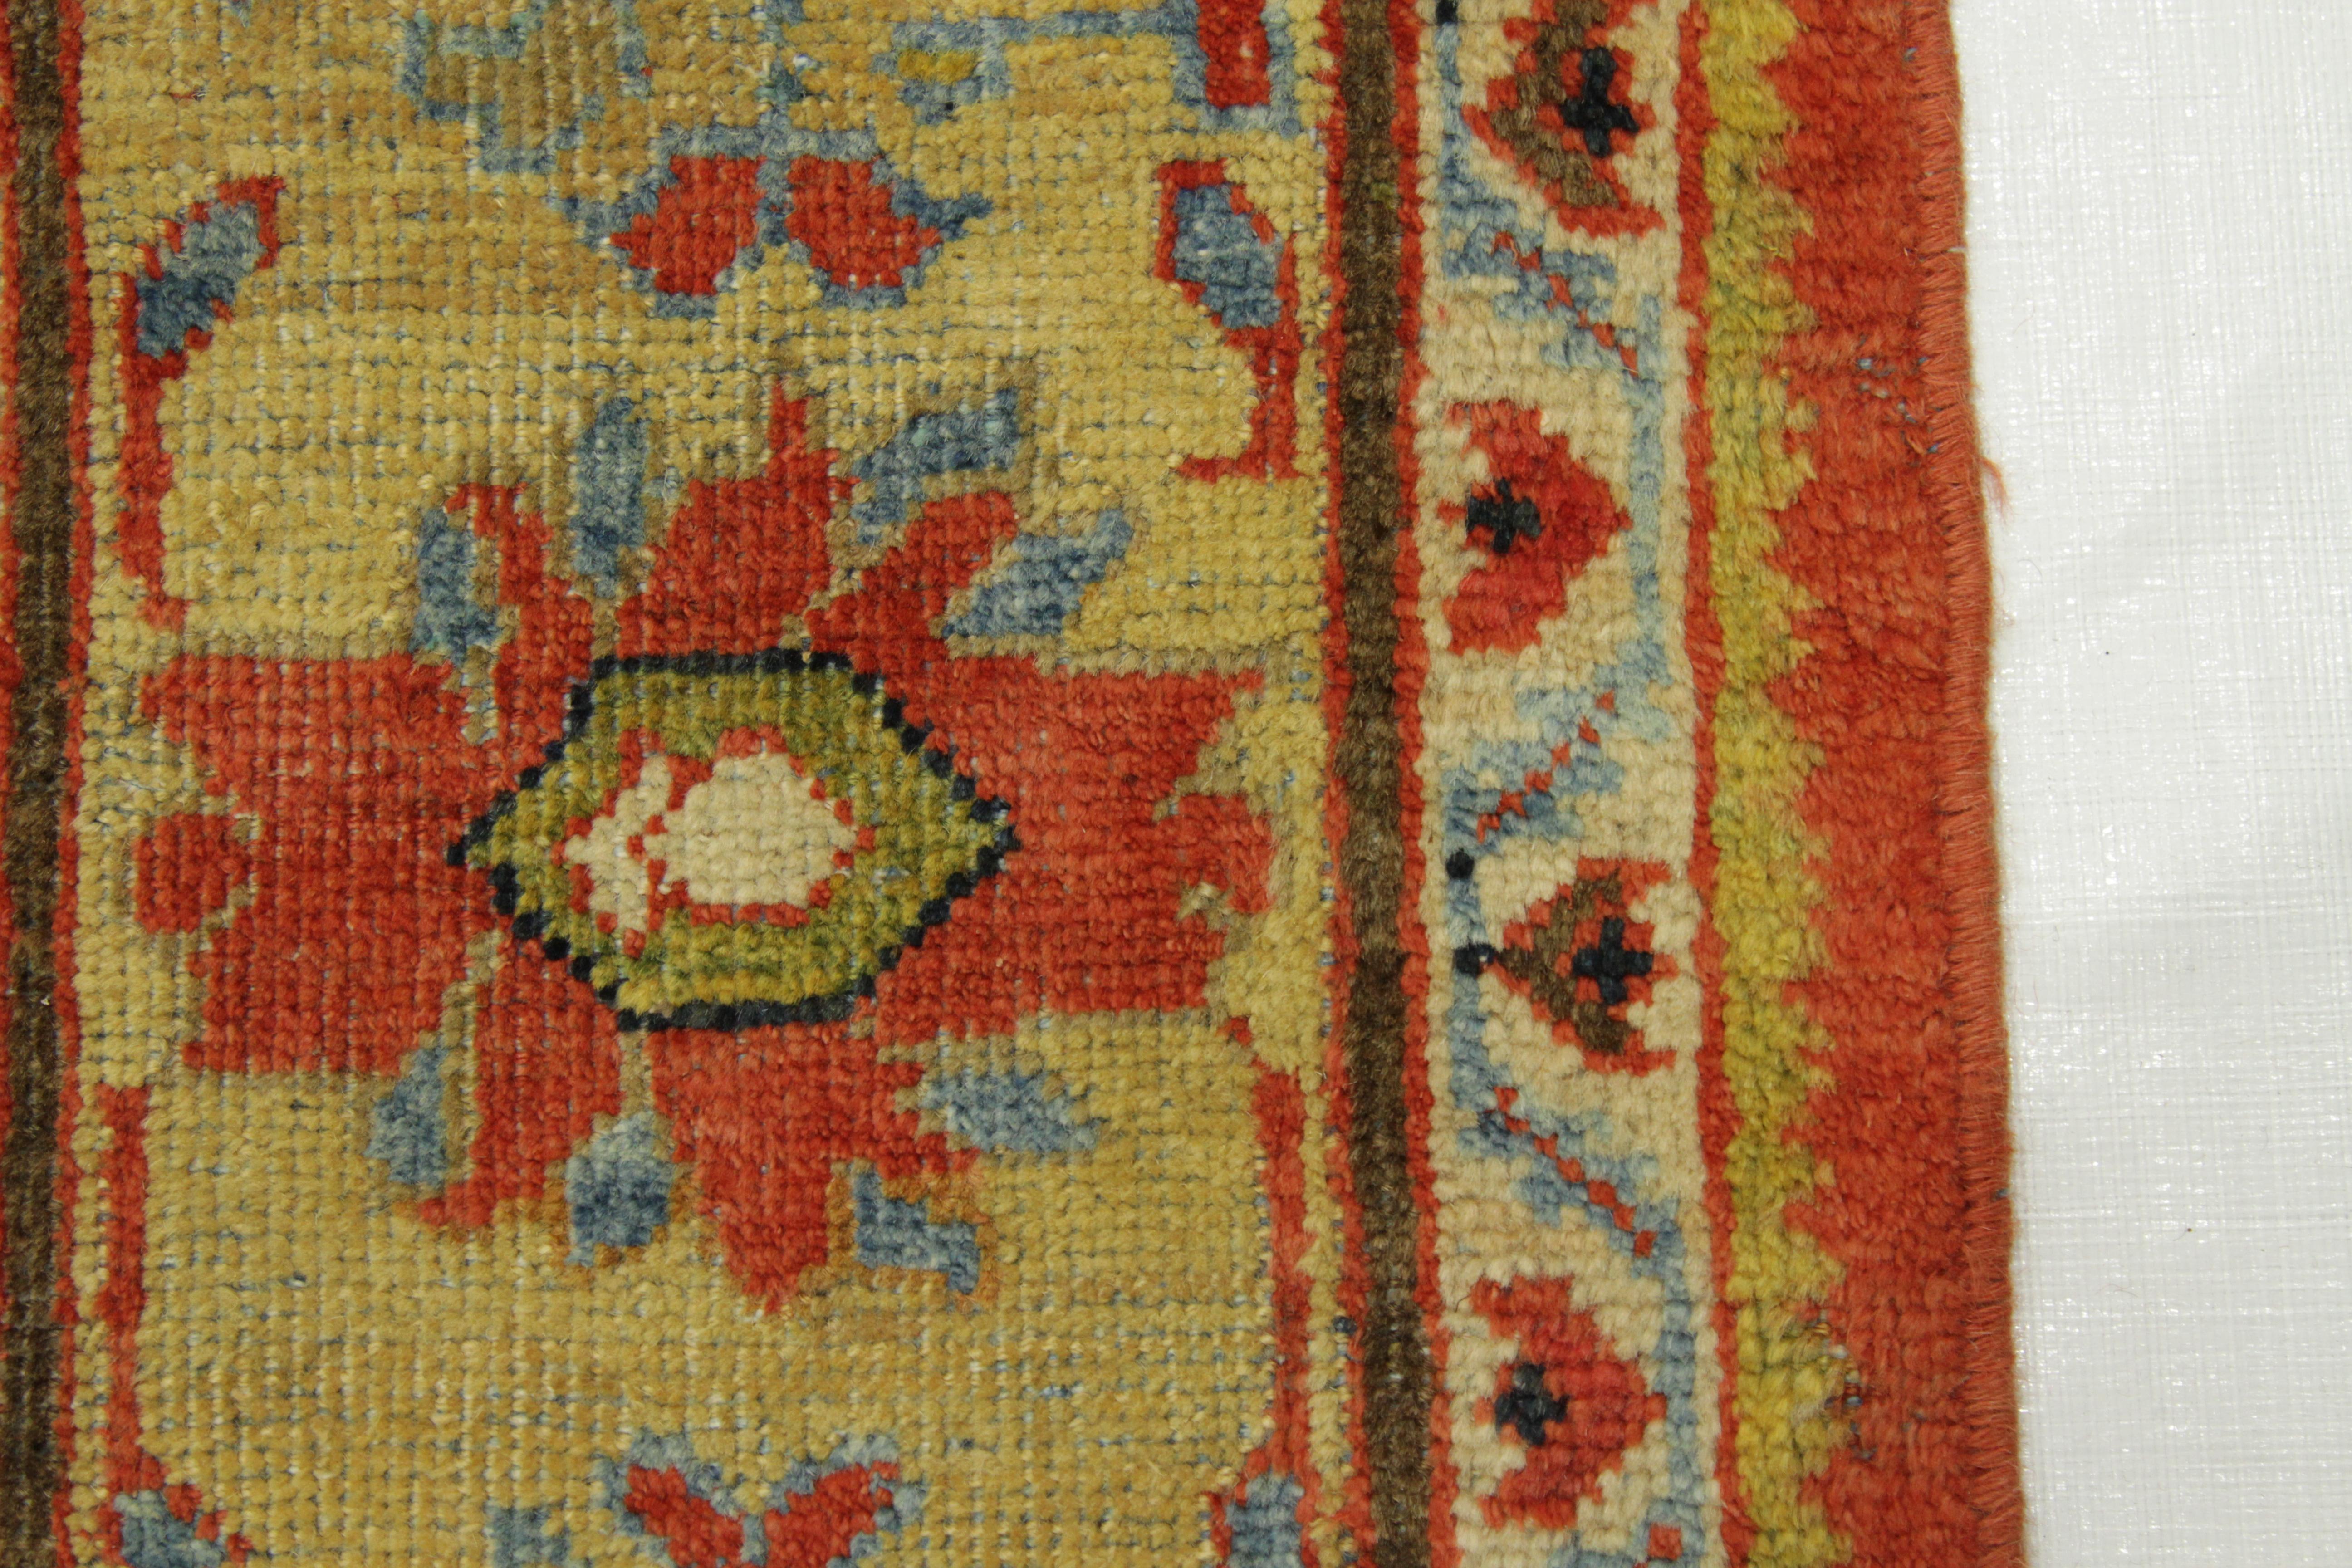 1920s Antique Mahal Persian Rug with Red and Yellow Floral Patterns For Sale 1